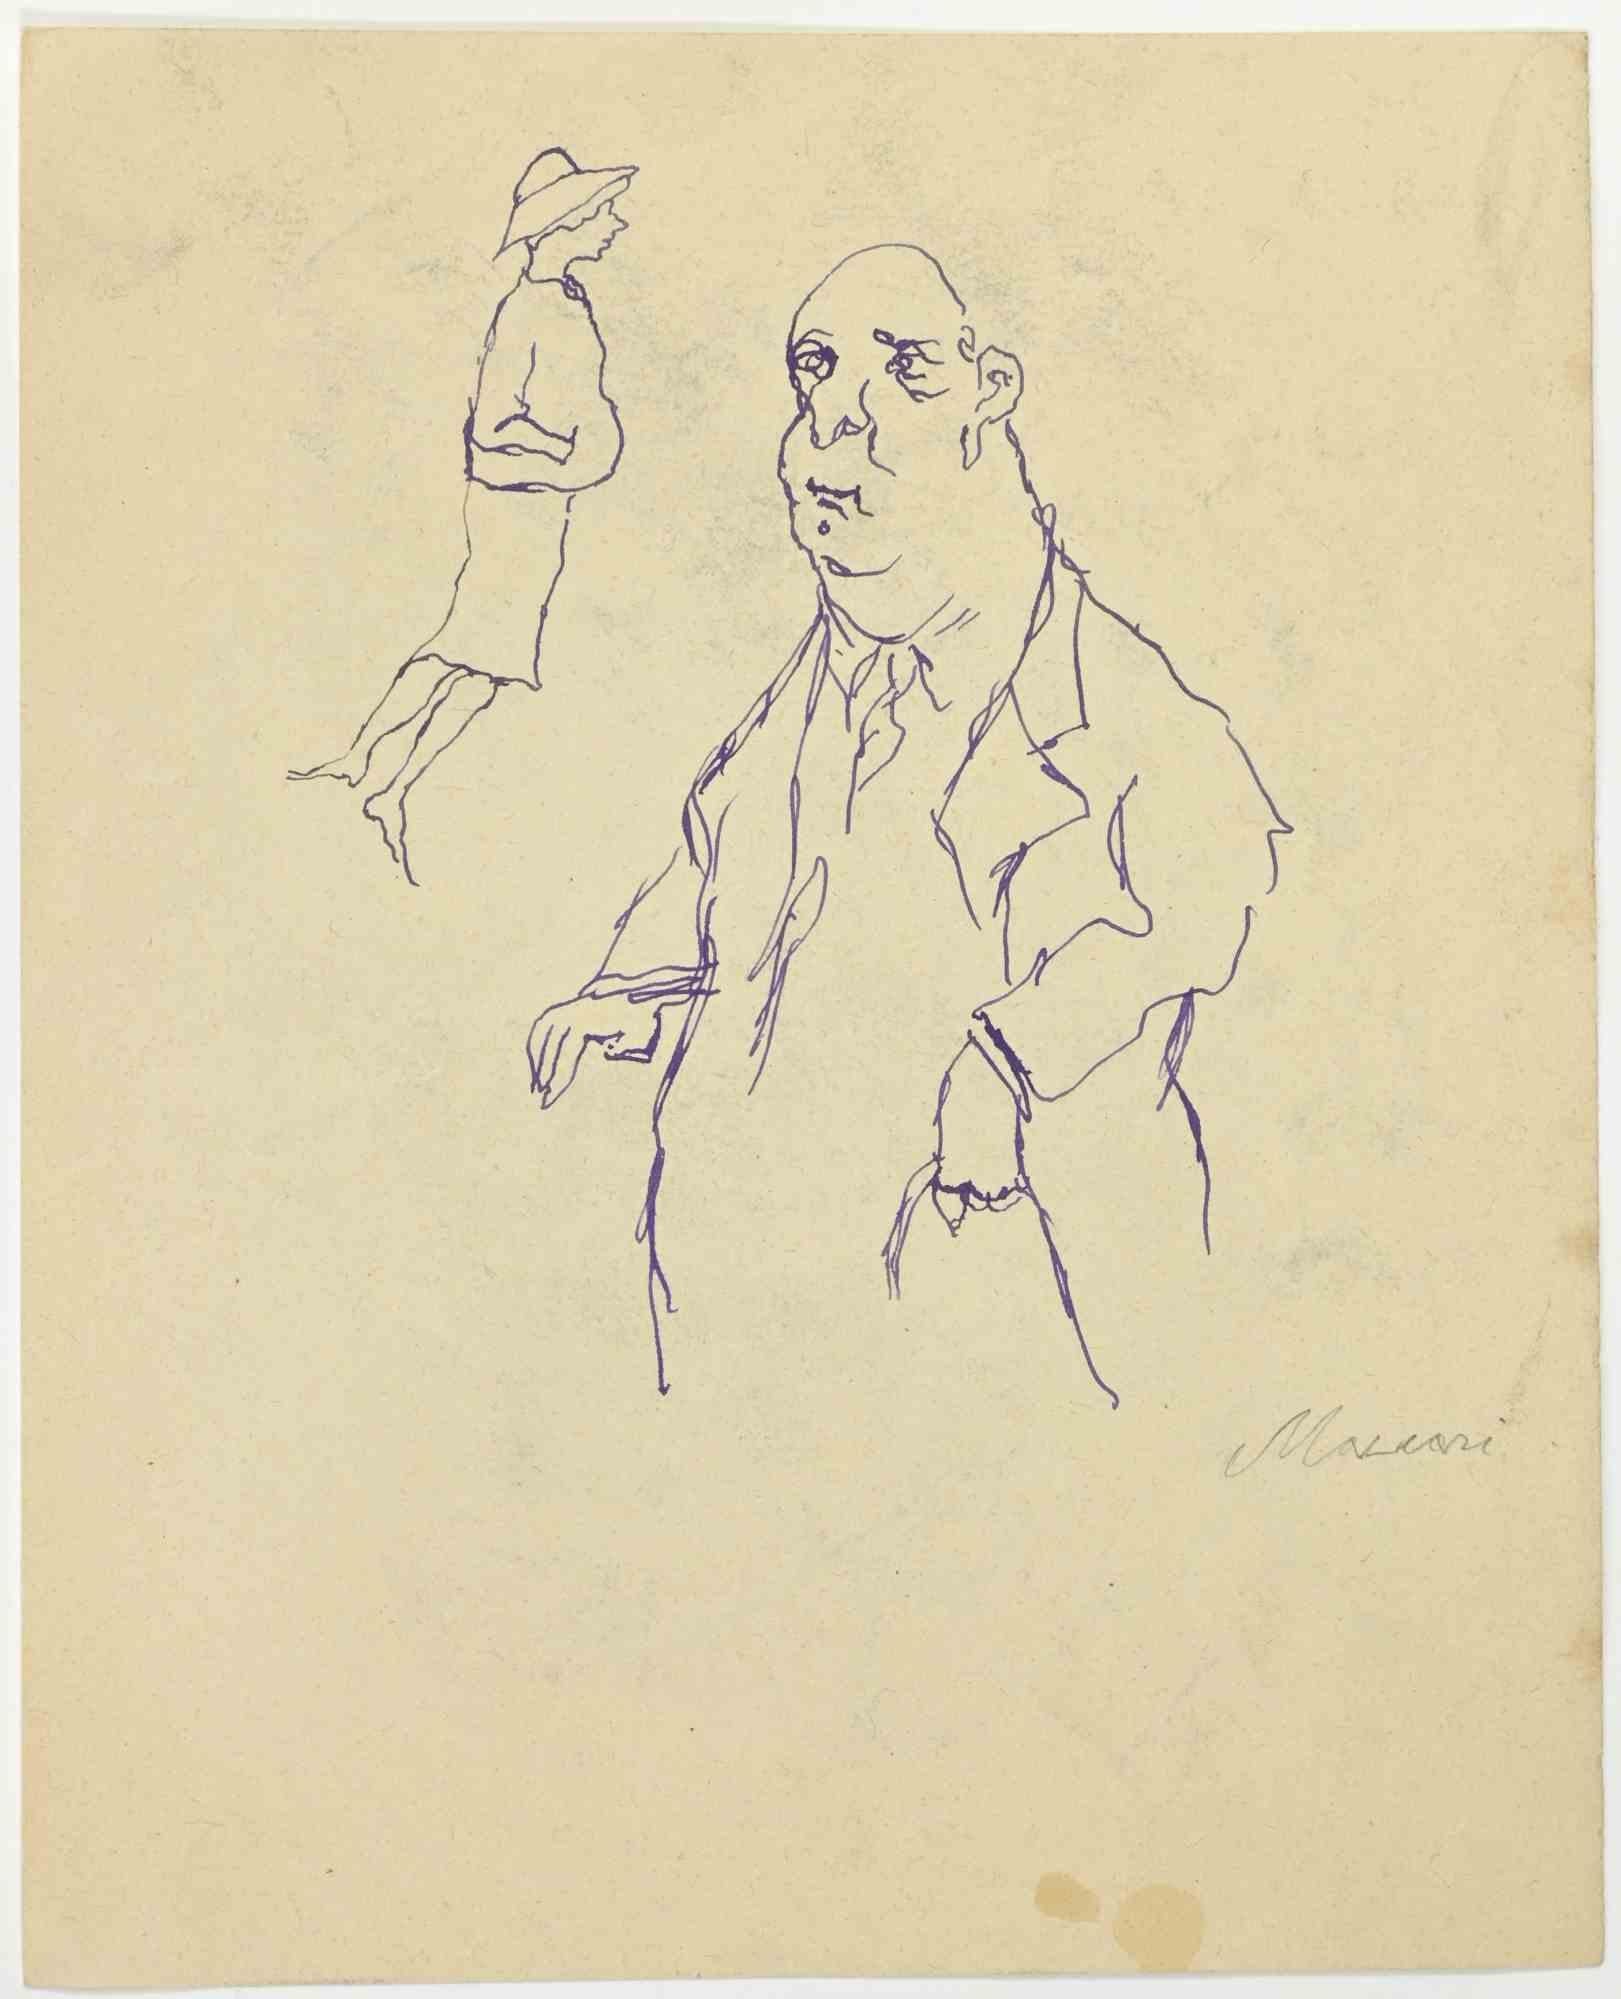 Figures is a Pen Drawing realized by Mino Maccari  (1924-1989) in the 1960s.

Hand-signed on the lower, with another drawing on the rear.

Good condition with some foxing.

Mino Maccari (Siena, 1924-Rome, June 16, 1989) was an Italian writer,